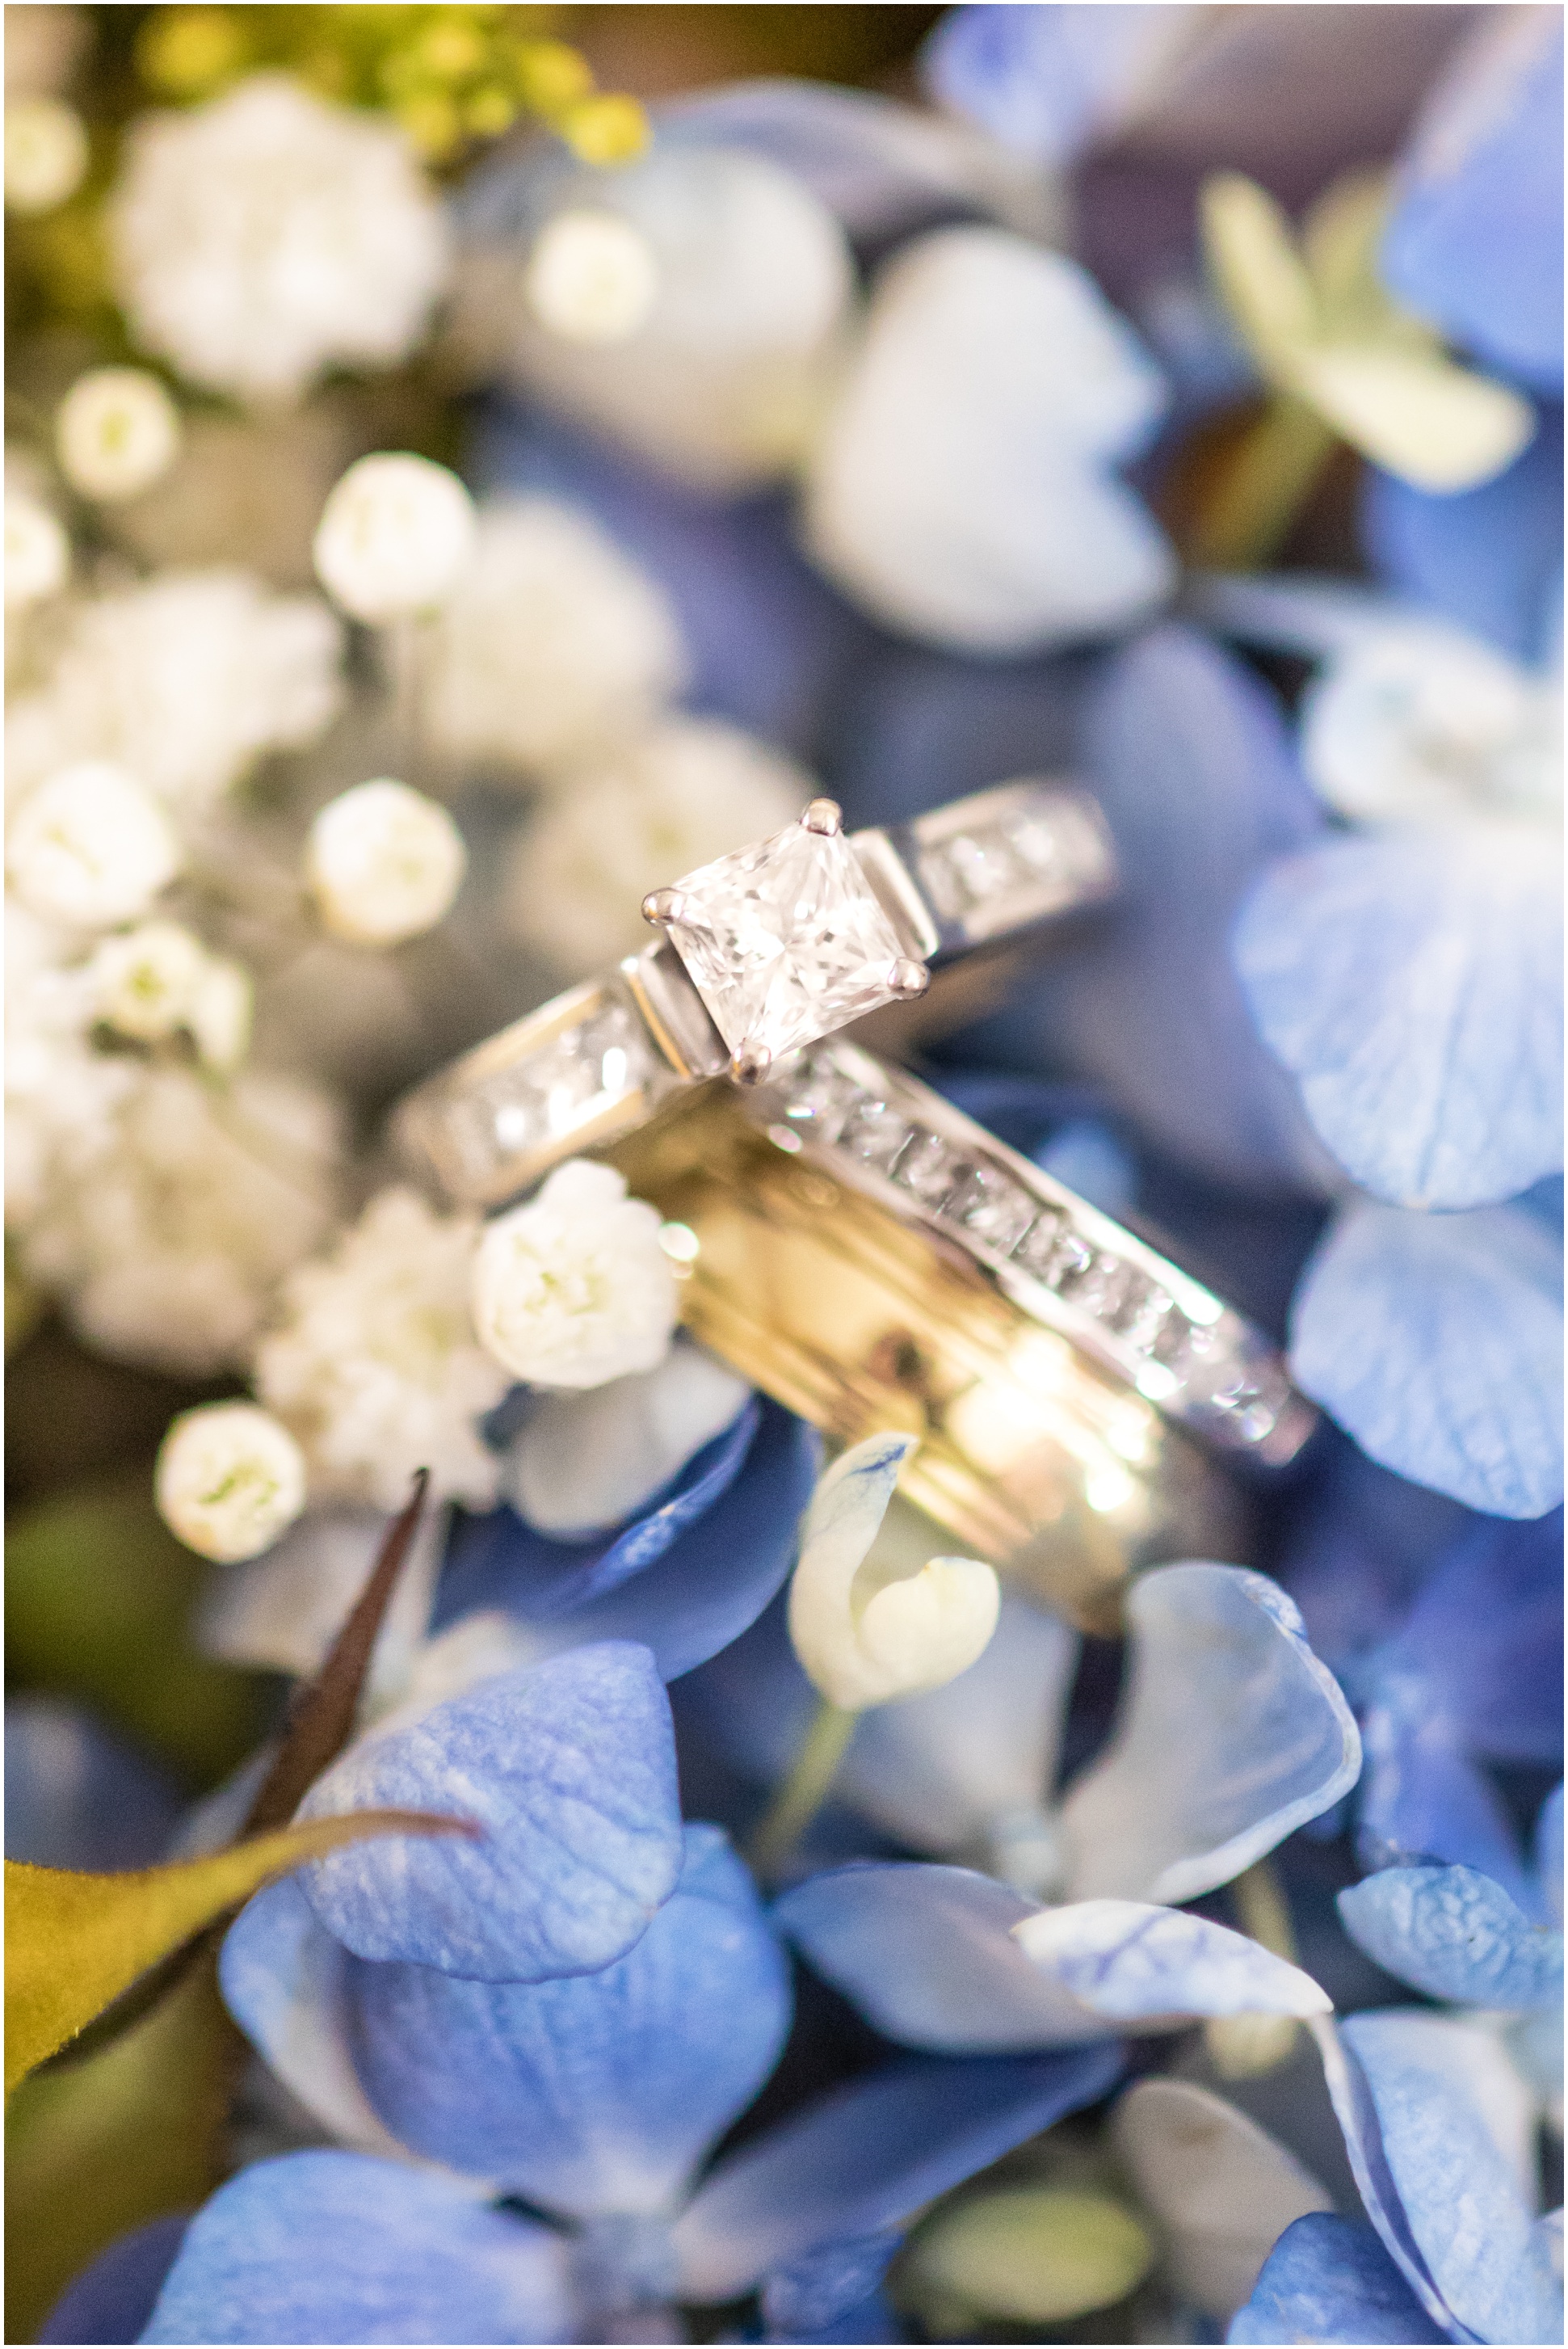 Wedding Rings in the bouquet of sunflowers, baby's breath, and blue hydrangas